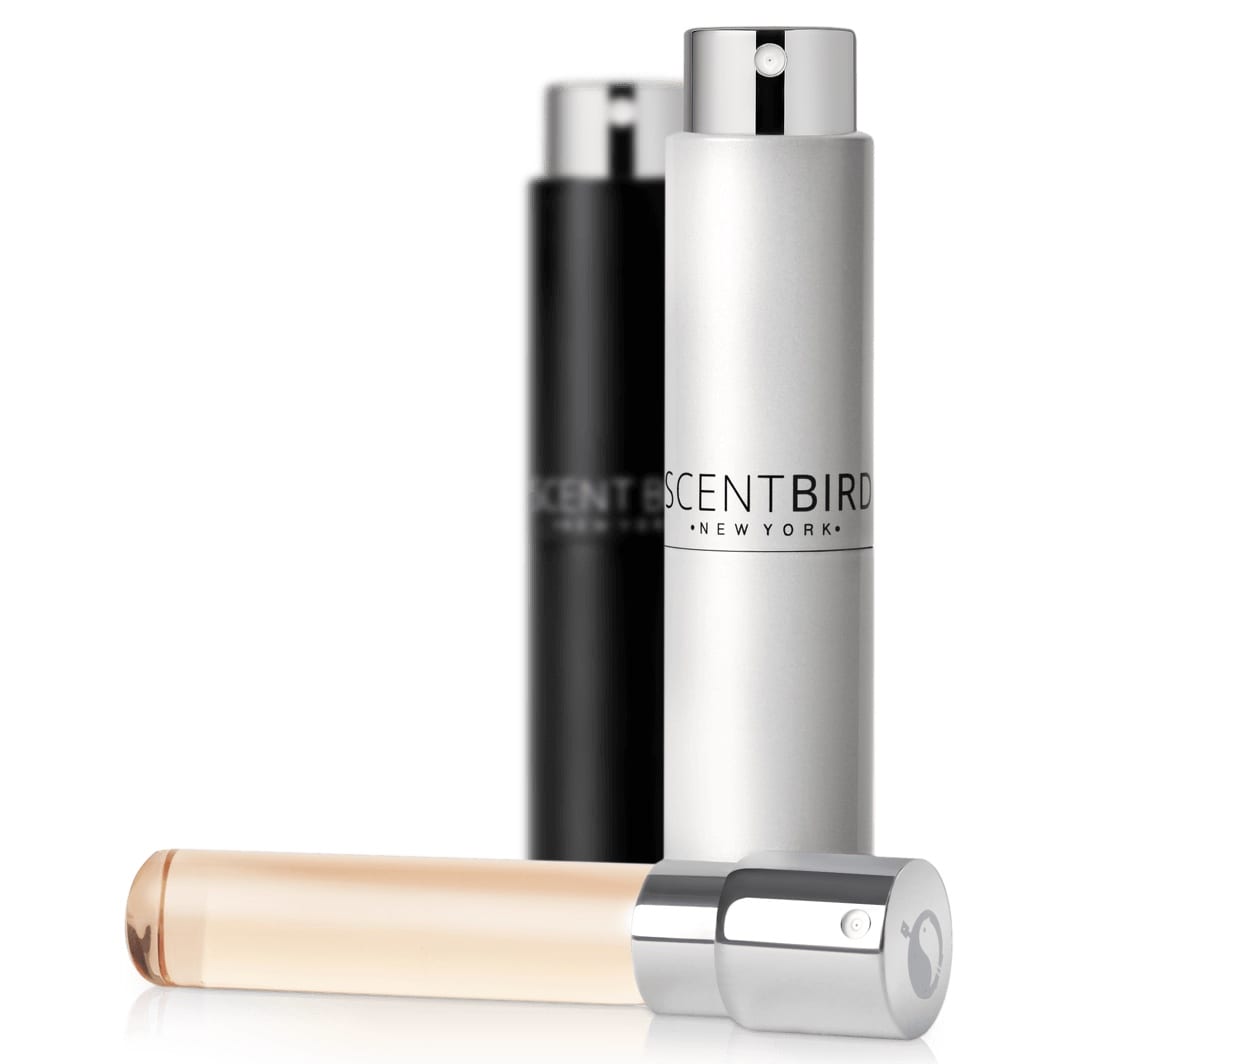 Scentbird Perfume and Cologne Subscription Gift Idea 2022